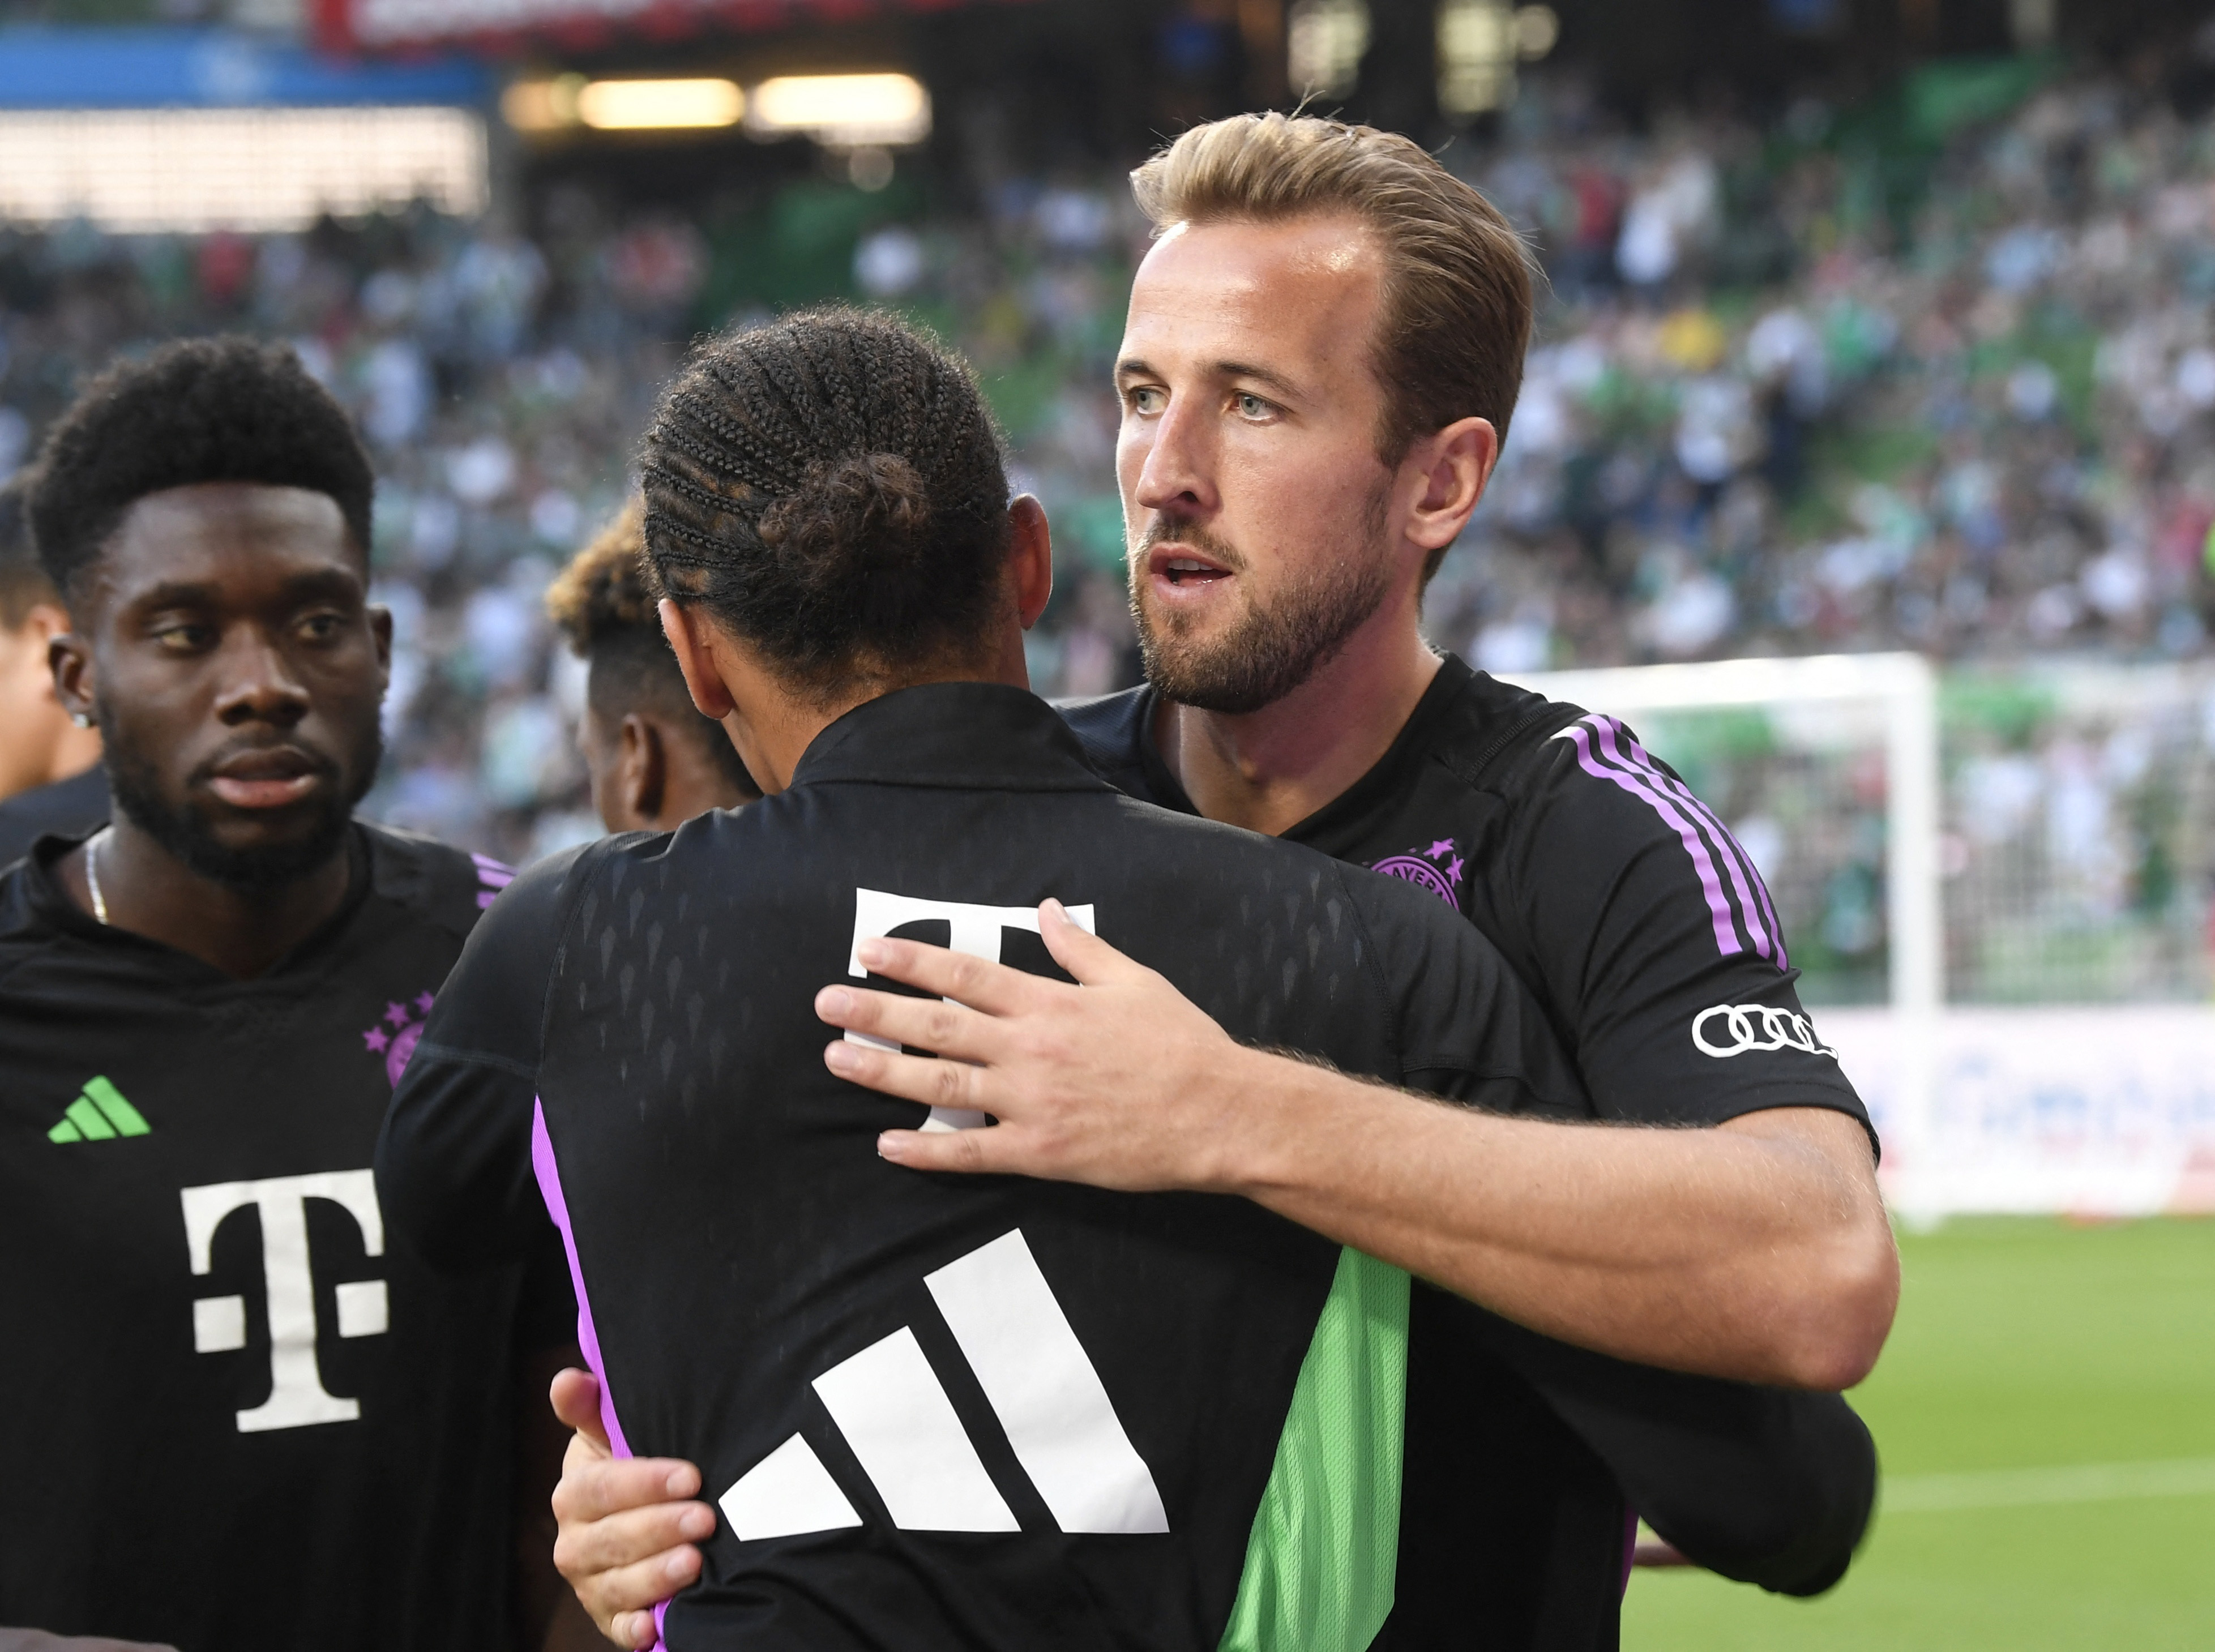 Harry Kane sparkles in Bundesliga debut with goal and assist